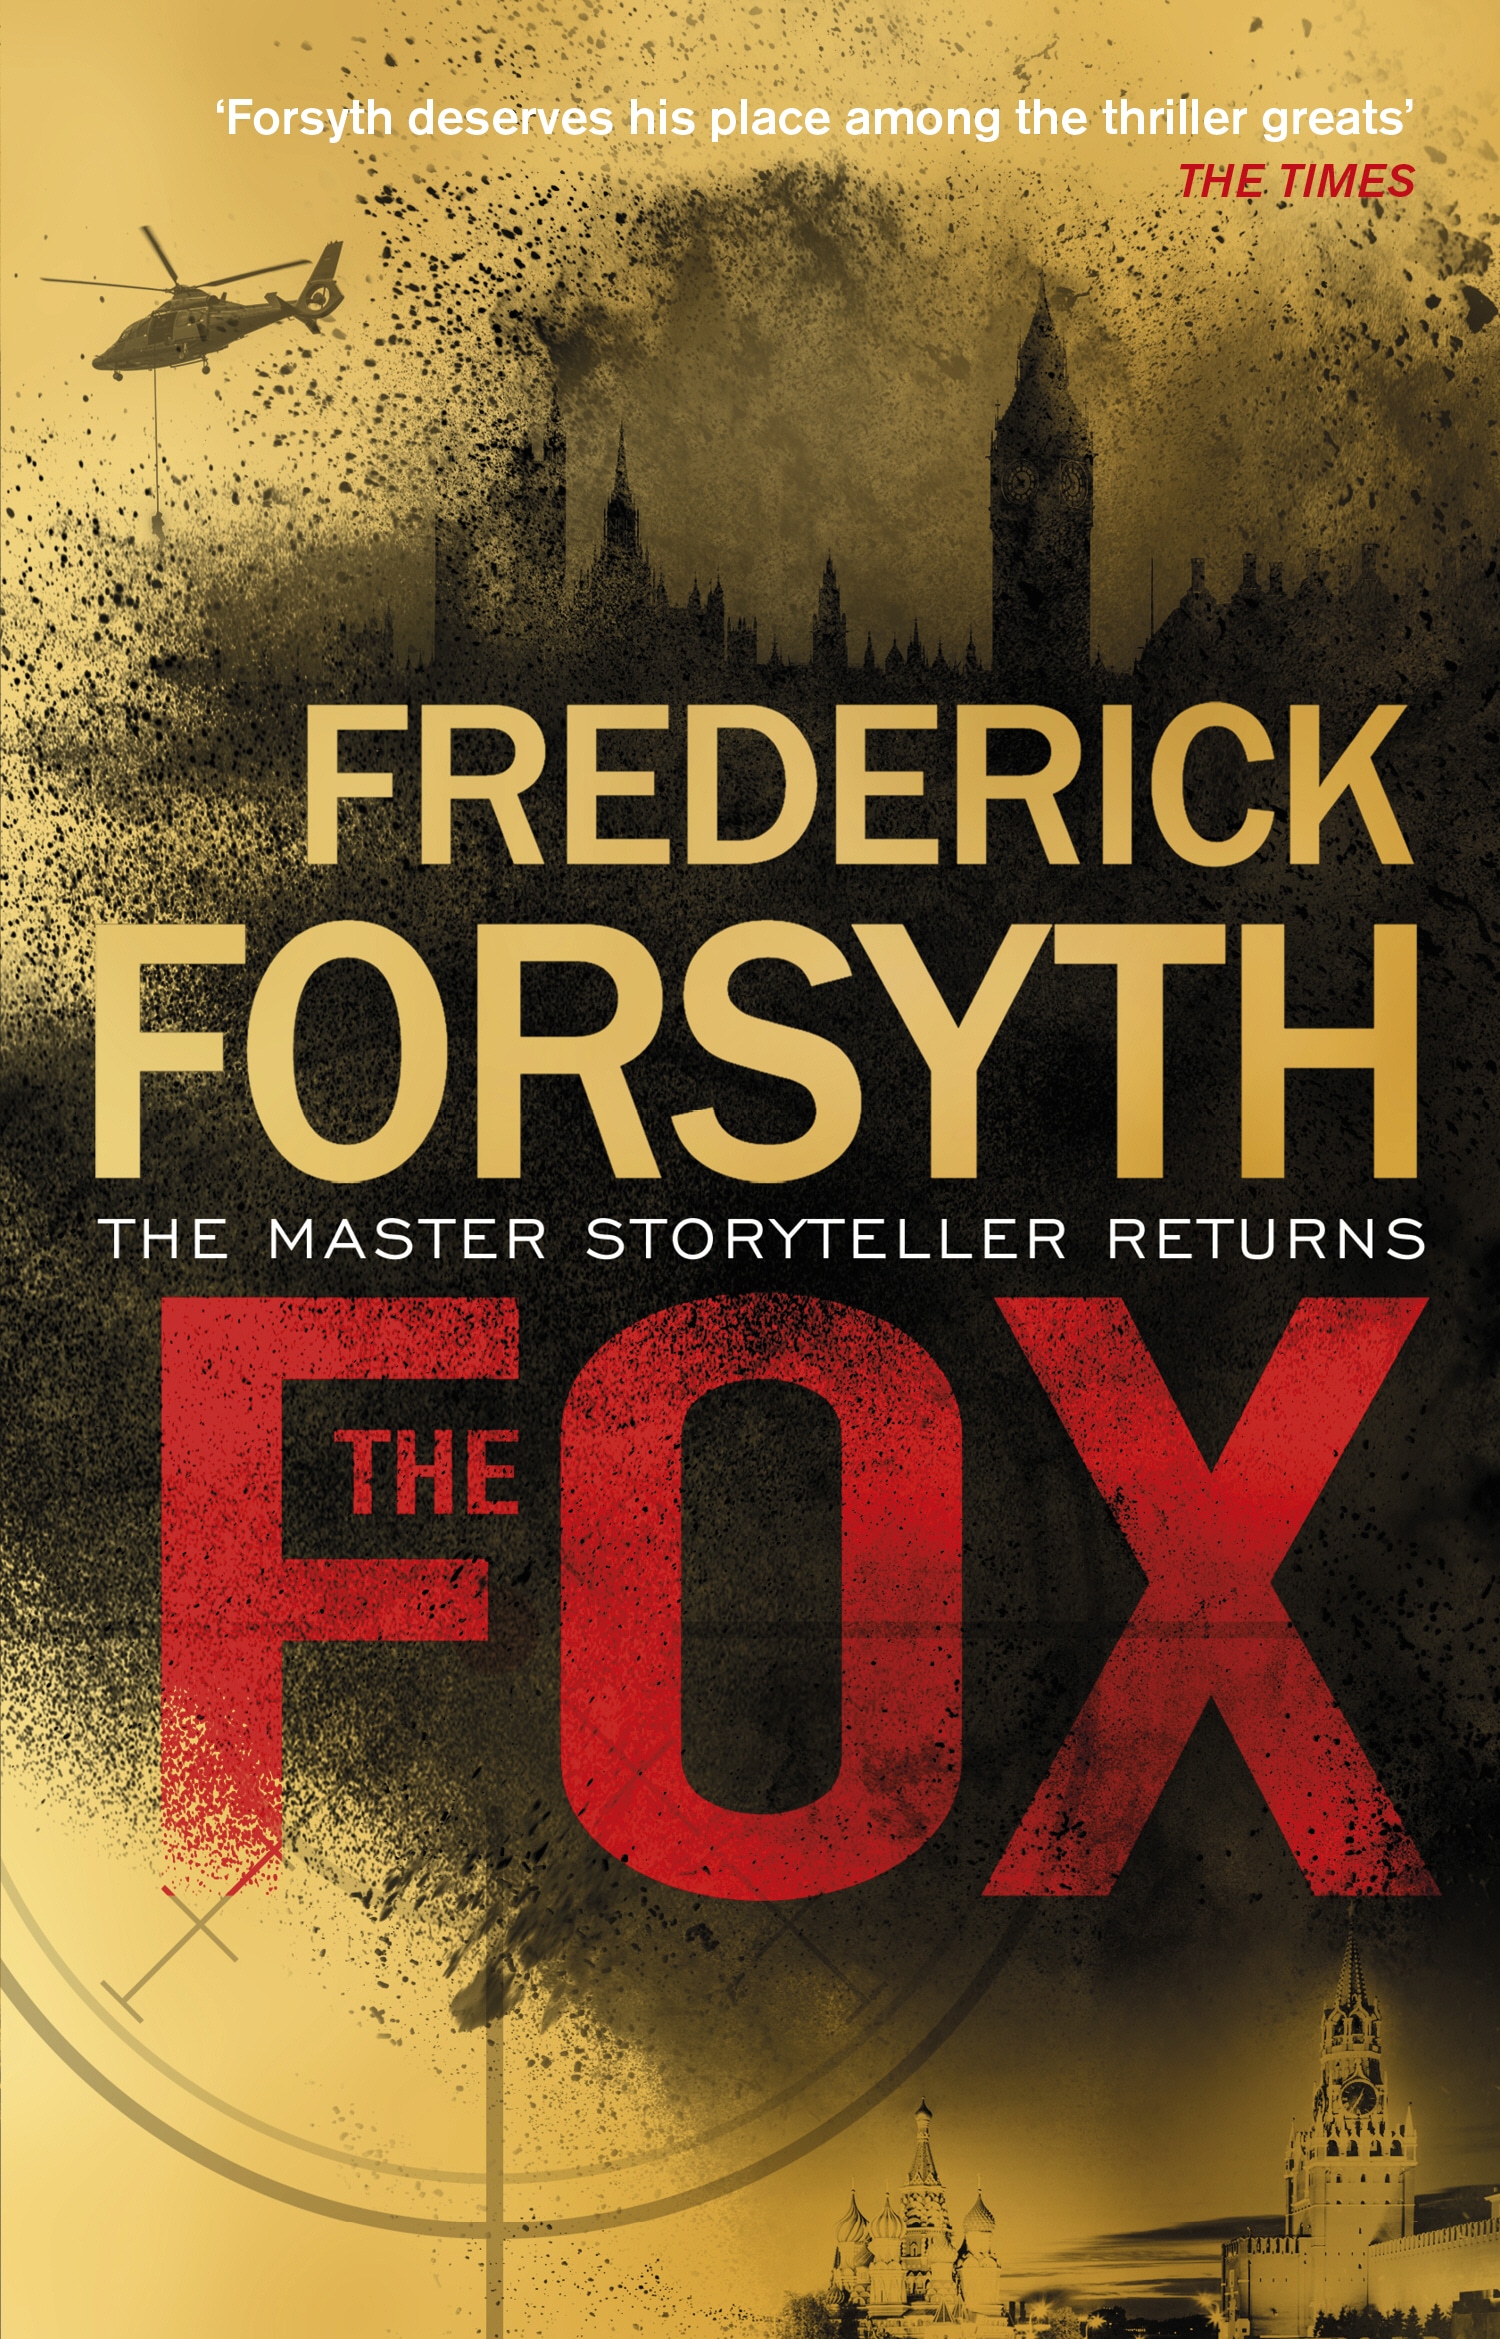 Book “The Fox” by Frederick Forsyth — July 25, 2019